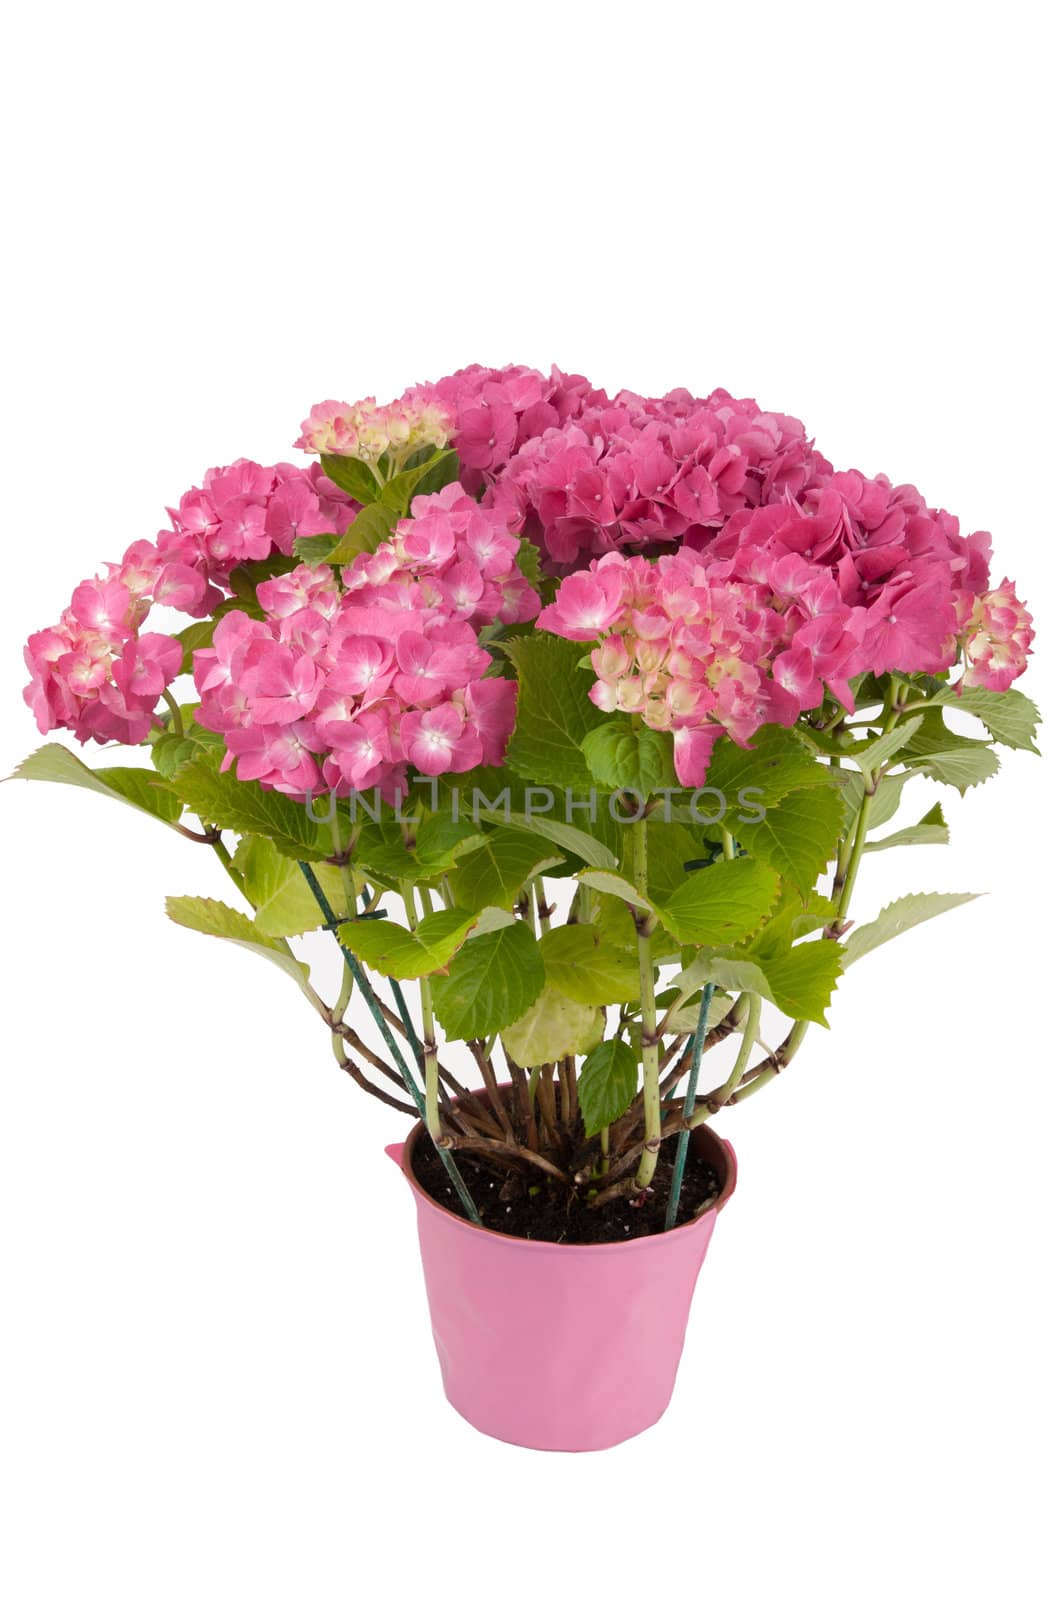 hydrangea flowers with a pink pot (top view)